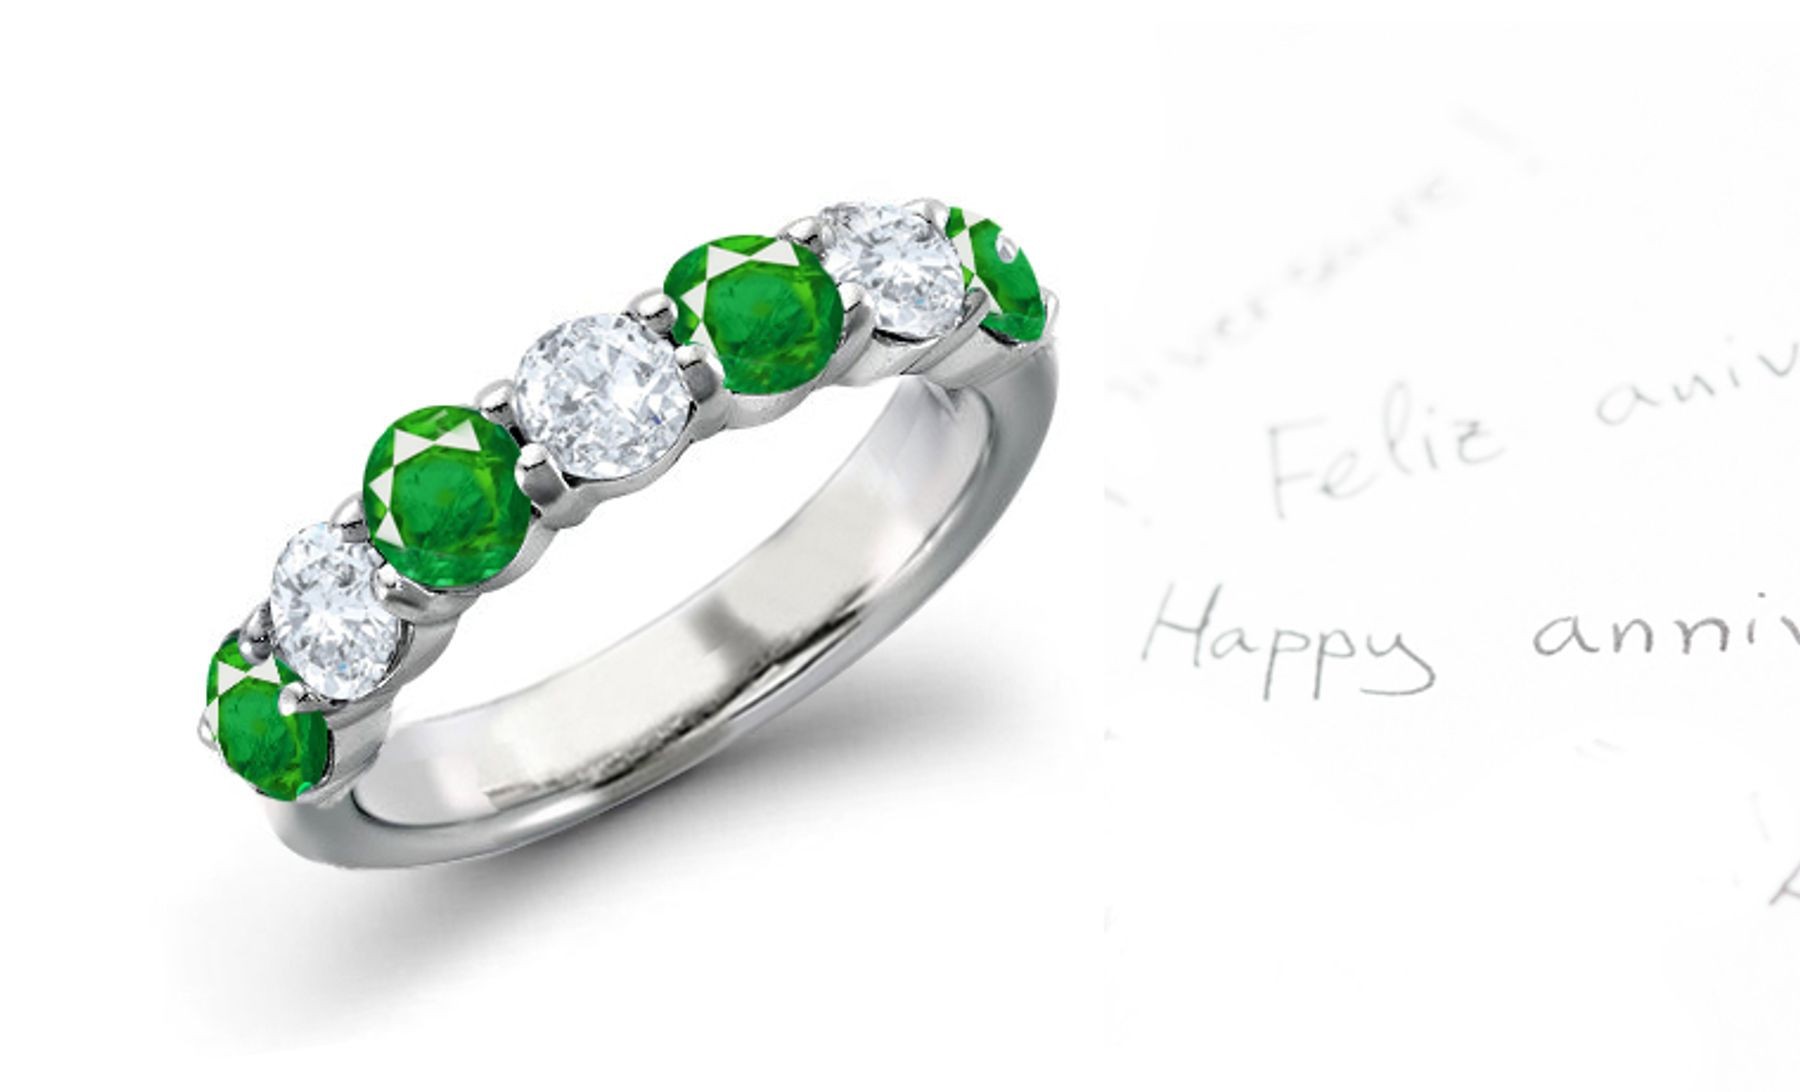 Emerald Jewelry Half Eternity Band: The luck of the Irish will be with you in this emerald and diamond rounds 4-prong-set men's ring 14K White Gold